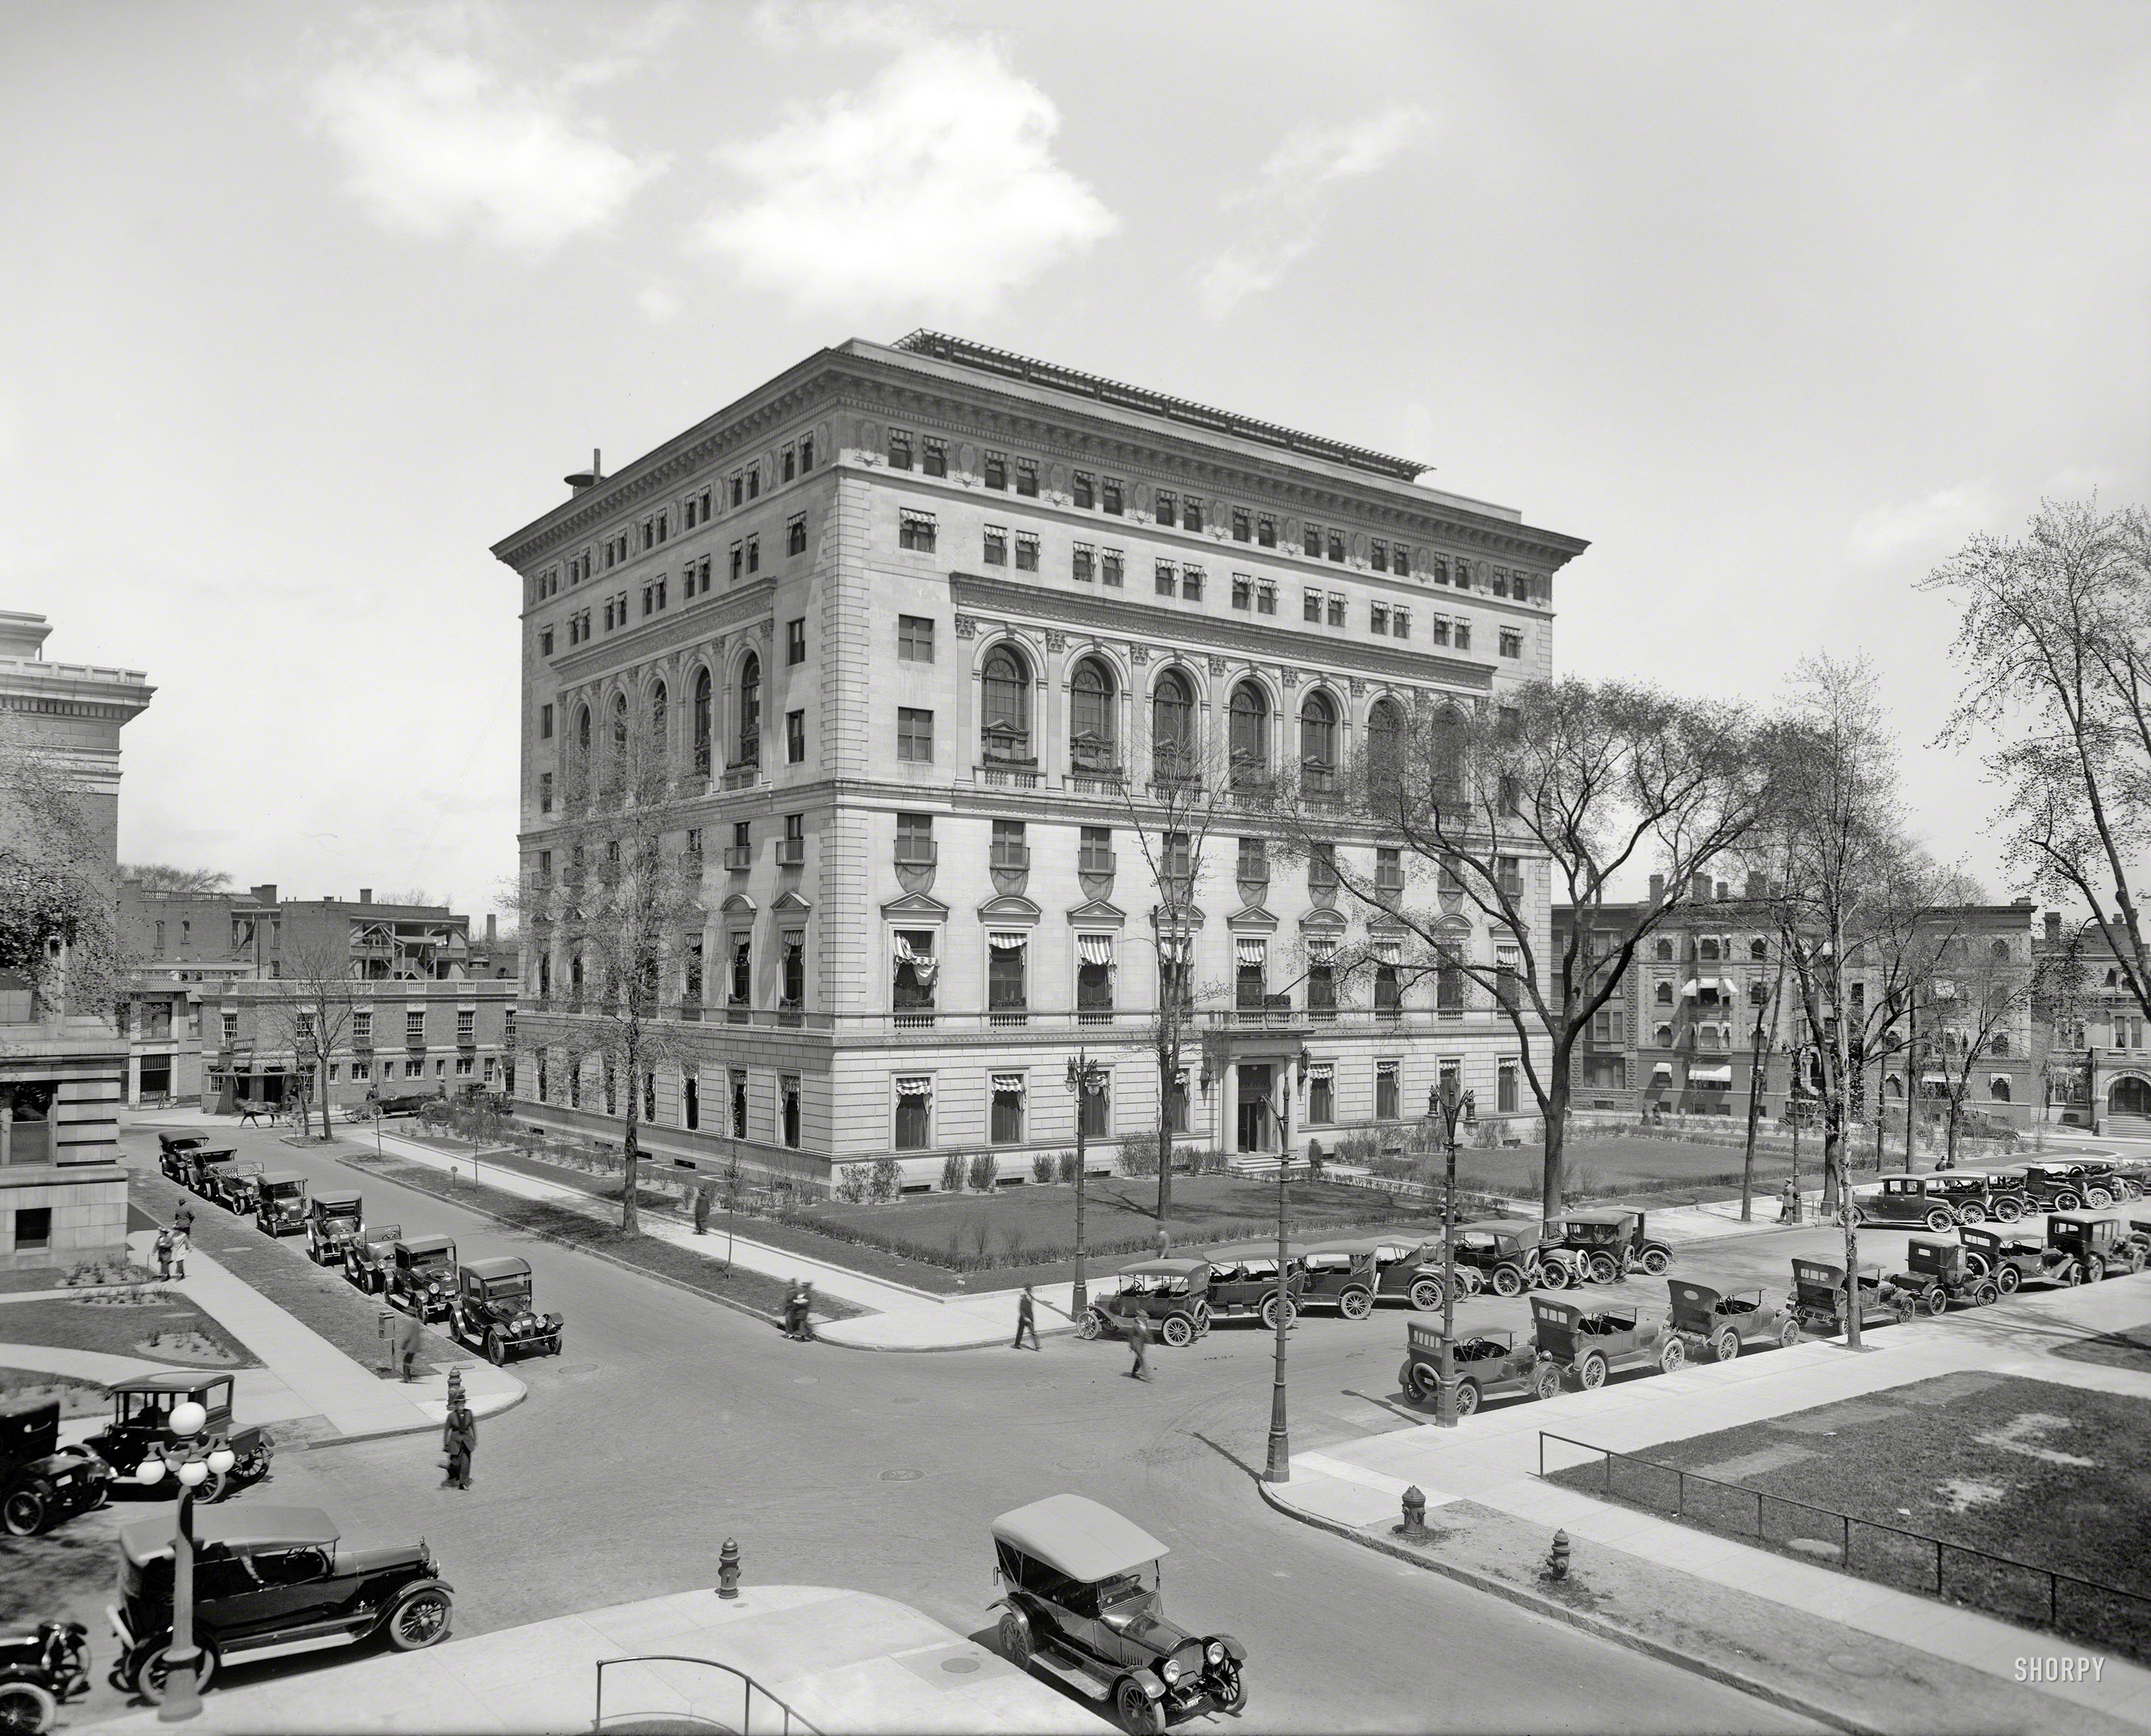 Circa 1916. "Detroit Athletic Club from the Plaza Hotel." Evidently something of a motorcar magnet. 8x10 glass negative, Detroit Publishing Co. View full size.